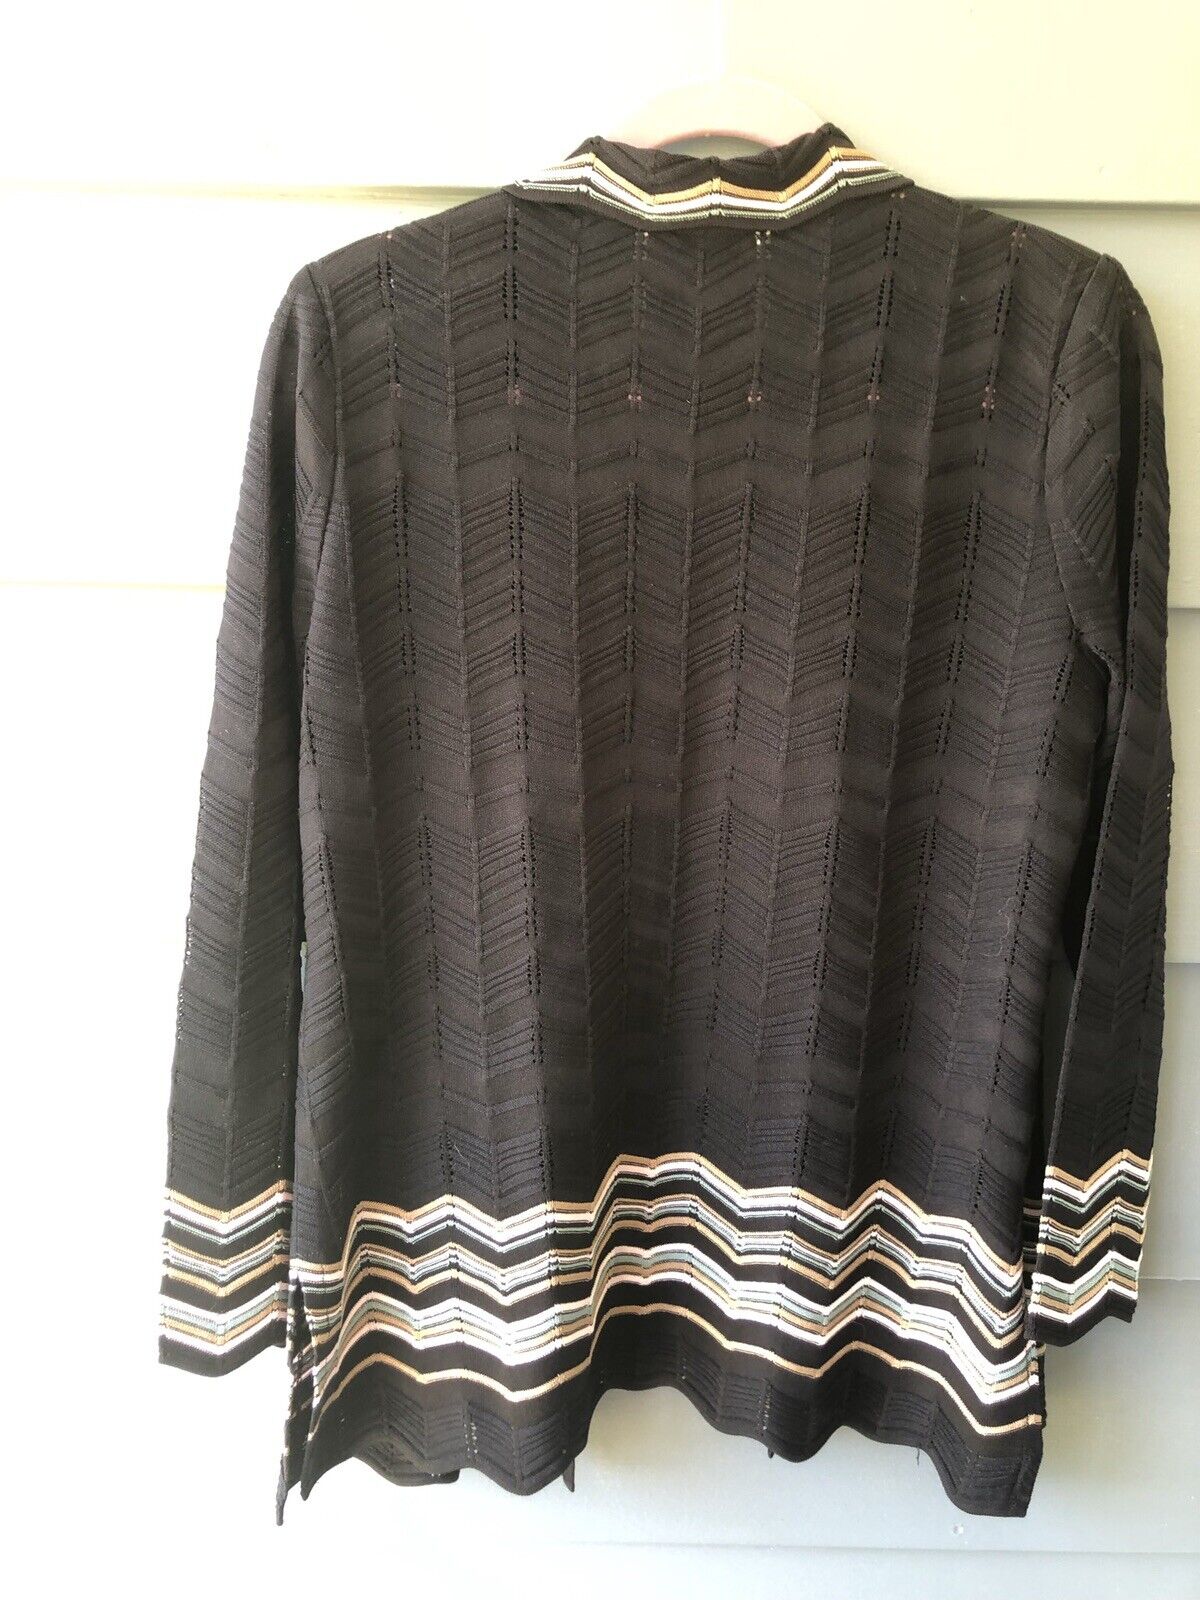 Exclusively Misook Black Striped Cardigan Size S - image 6